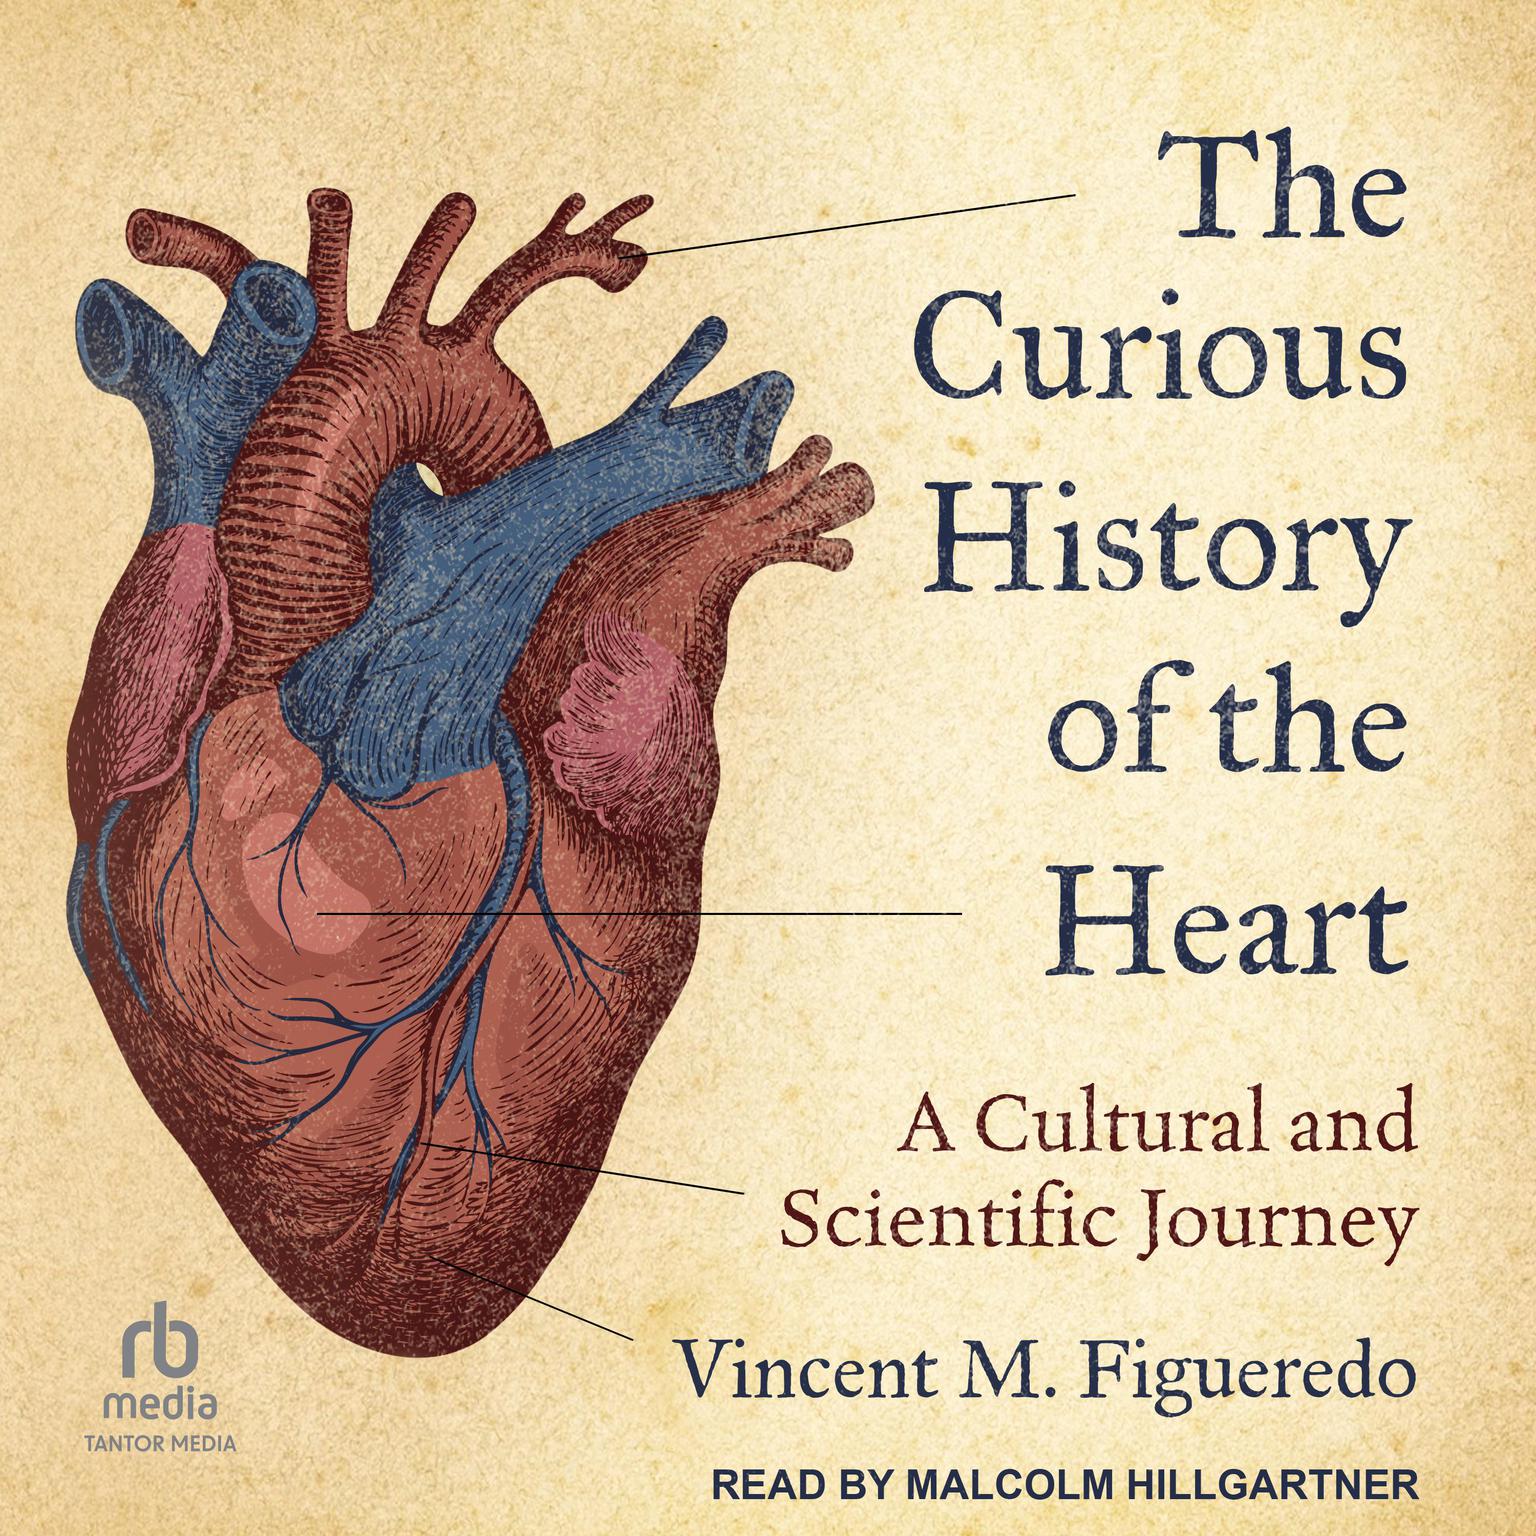 The Curious History of the Heart: A Cultural and Scientific Journey Audiobook, by Vincent M. Figueredo